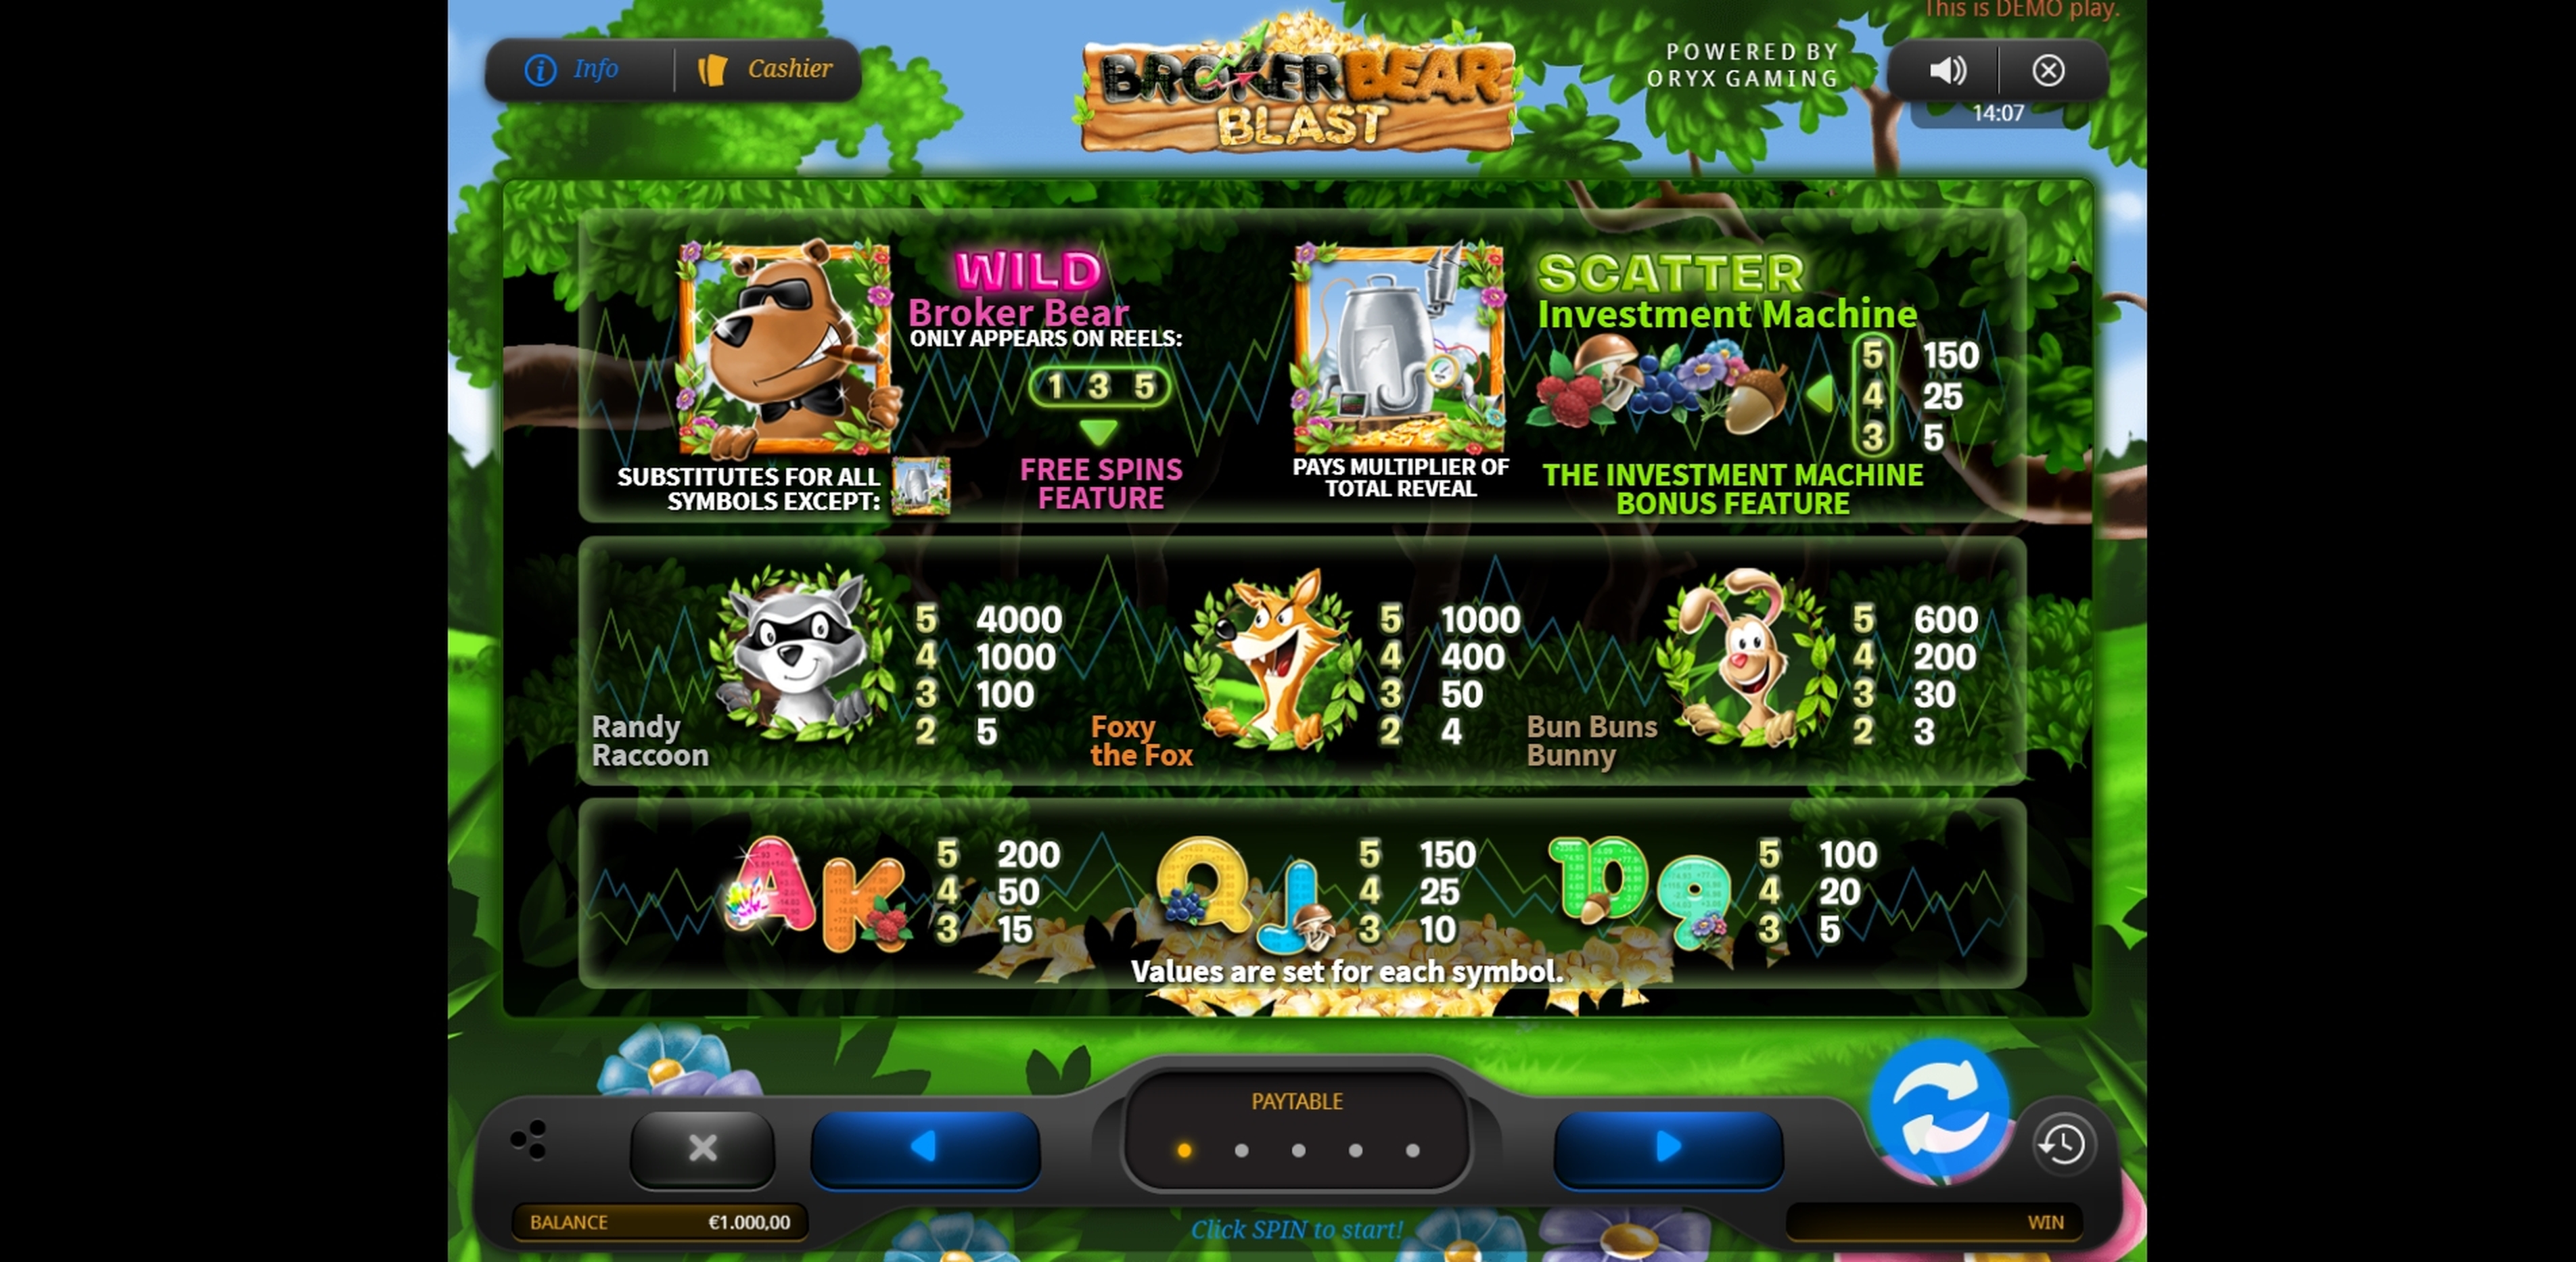 Info of Broker Bear Slot Game by Oryx Gaming